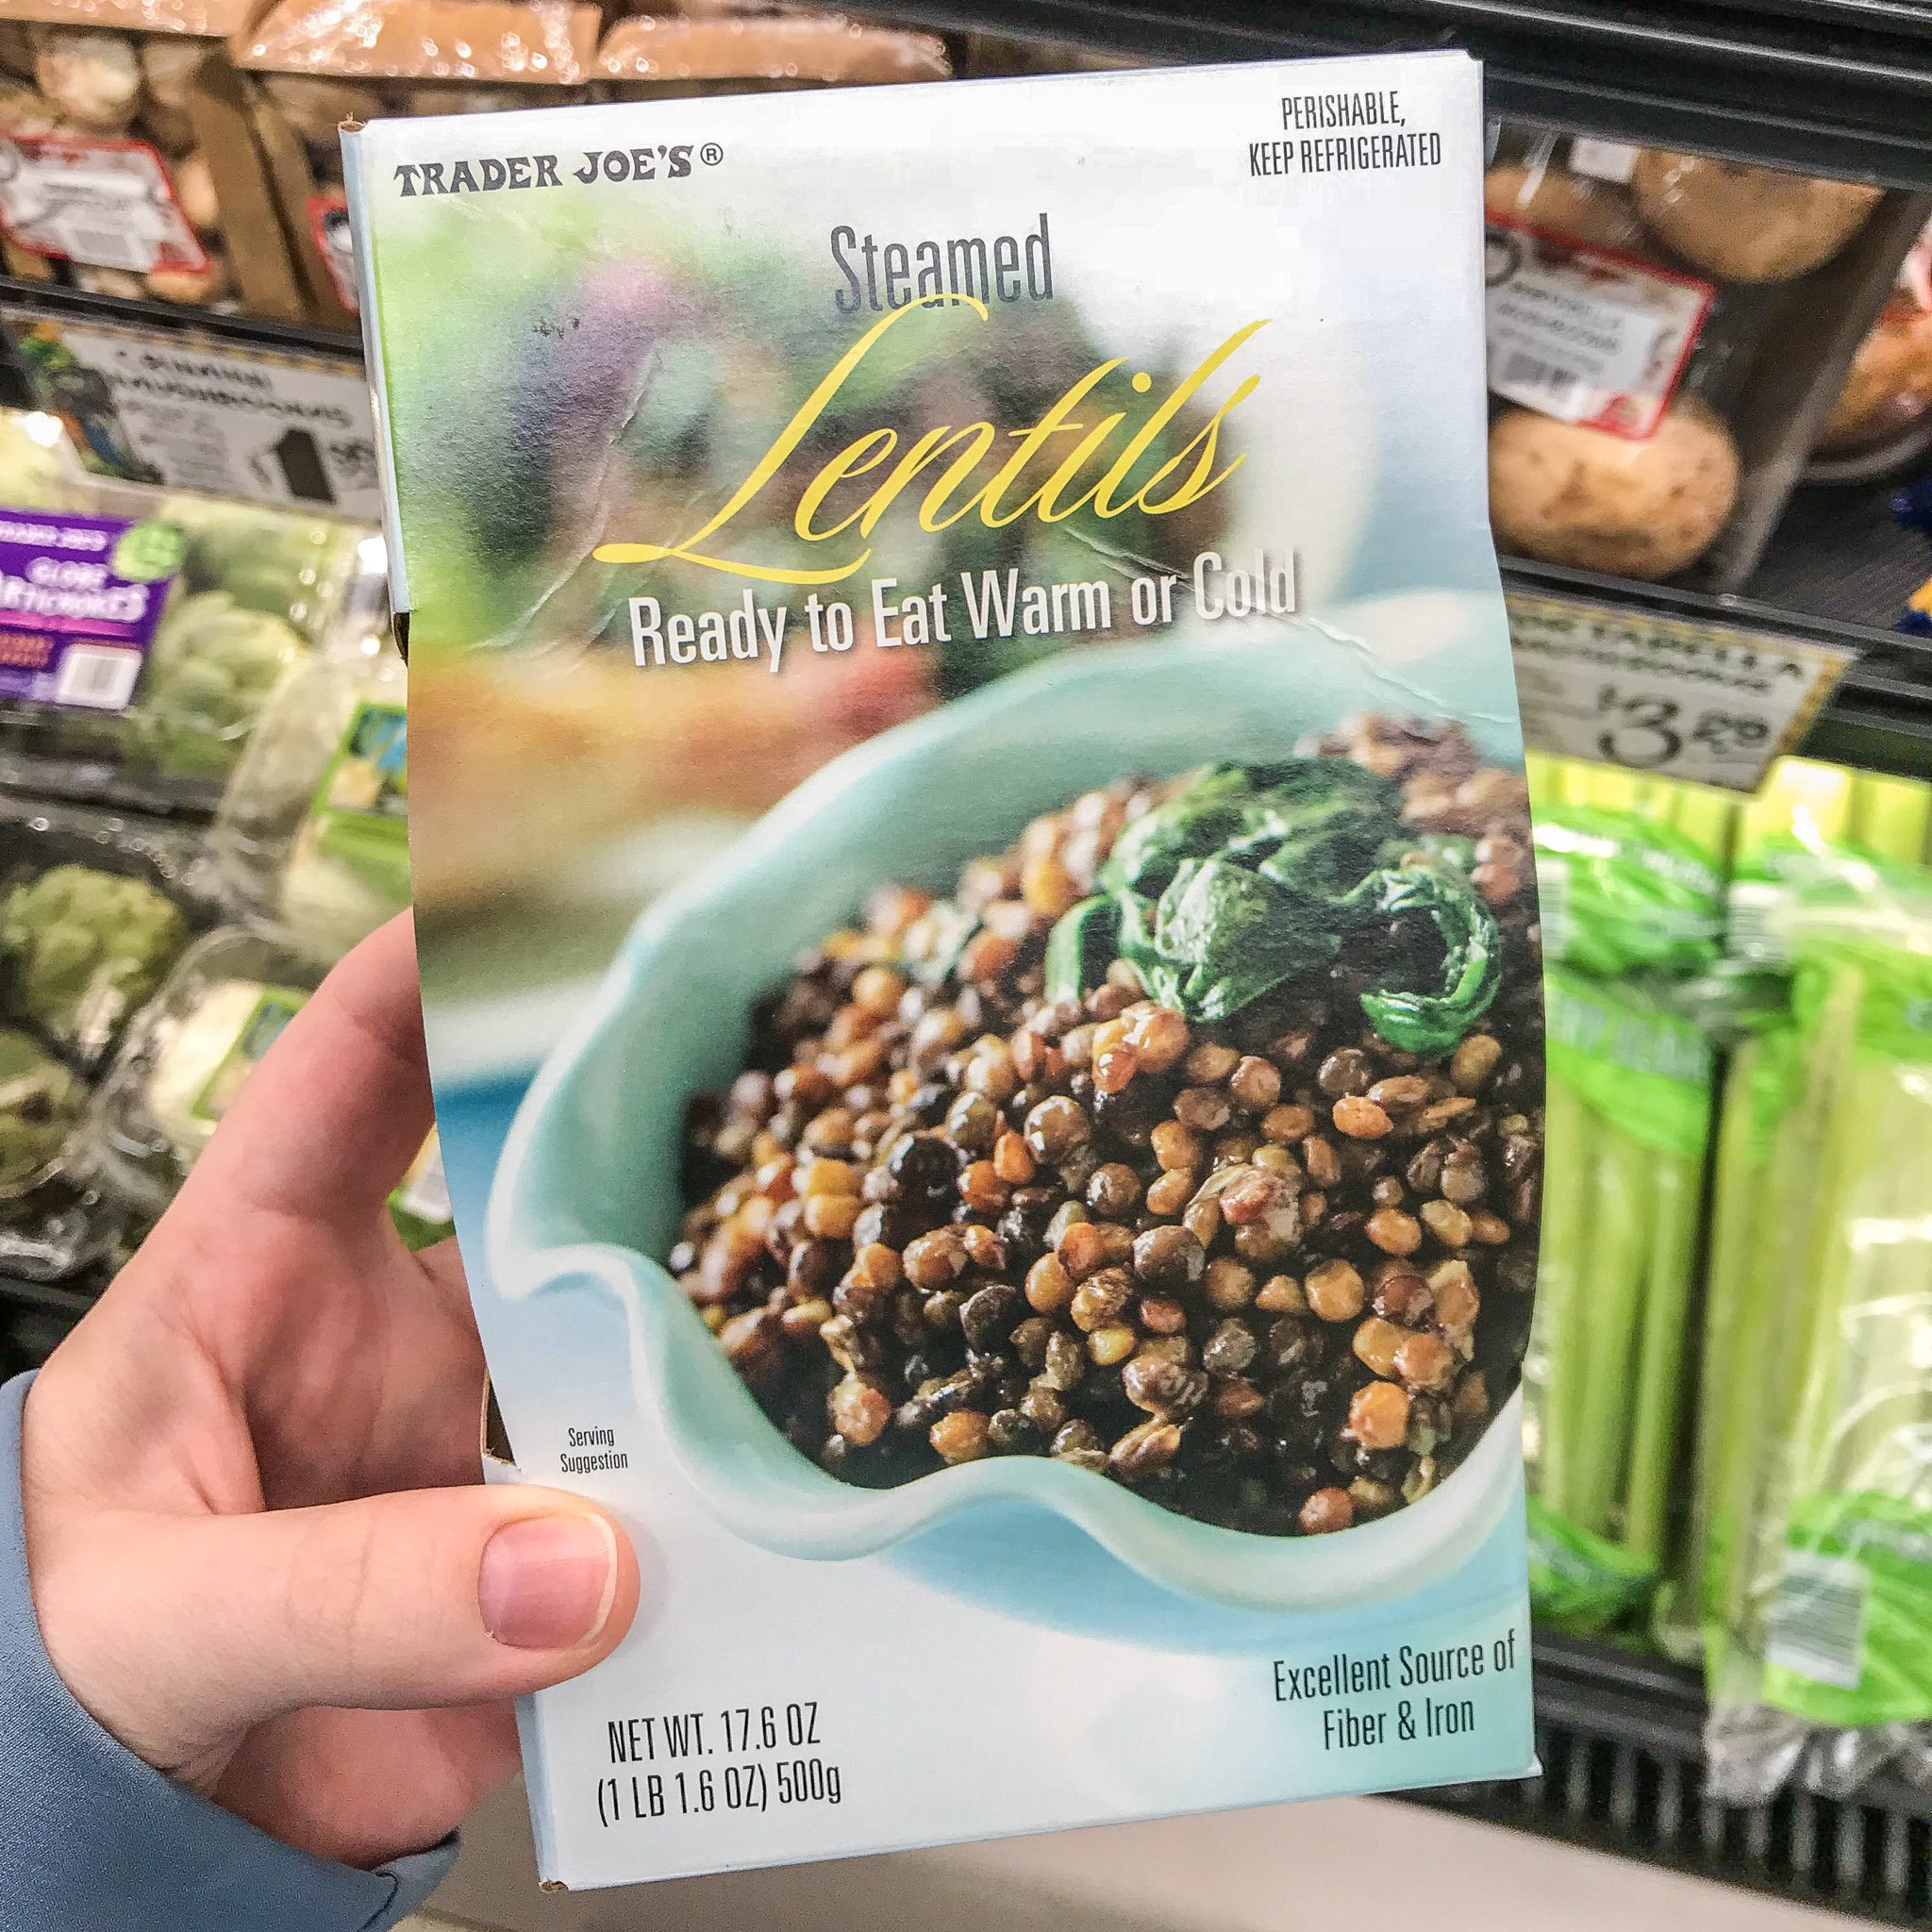 Here are the 9 Best Products to Meal Prep from Trader Joe's, plus meal ideas to give you a great starting place on your weekly meal plan!